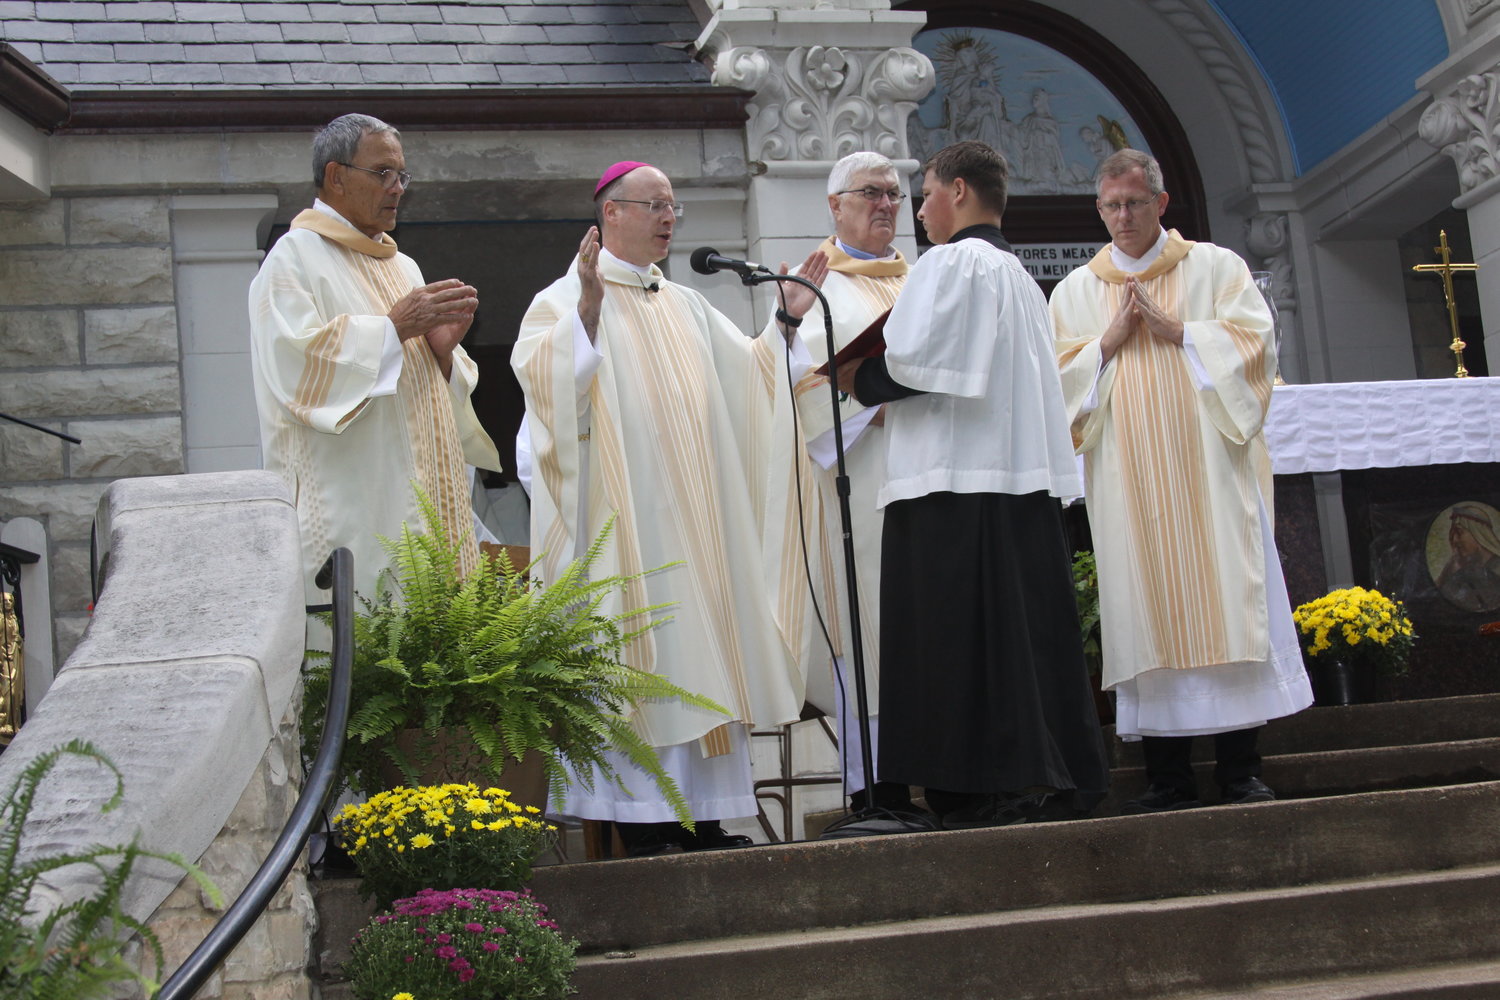 Bishop W. Shawn McKnight presides at the Mass at the outdoor altar on Sept. 11, for the annual Fall Pilgrimage to the Shrine of Our Lady of Sorrows in Starkenburg. Assisting him are Deacon Joseph Horton, Deacon Gerald Korman and Deacon Luke Mahsman. Pilgrimages to the shrine have been an annual event since 1891.